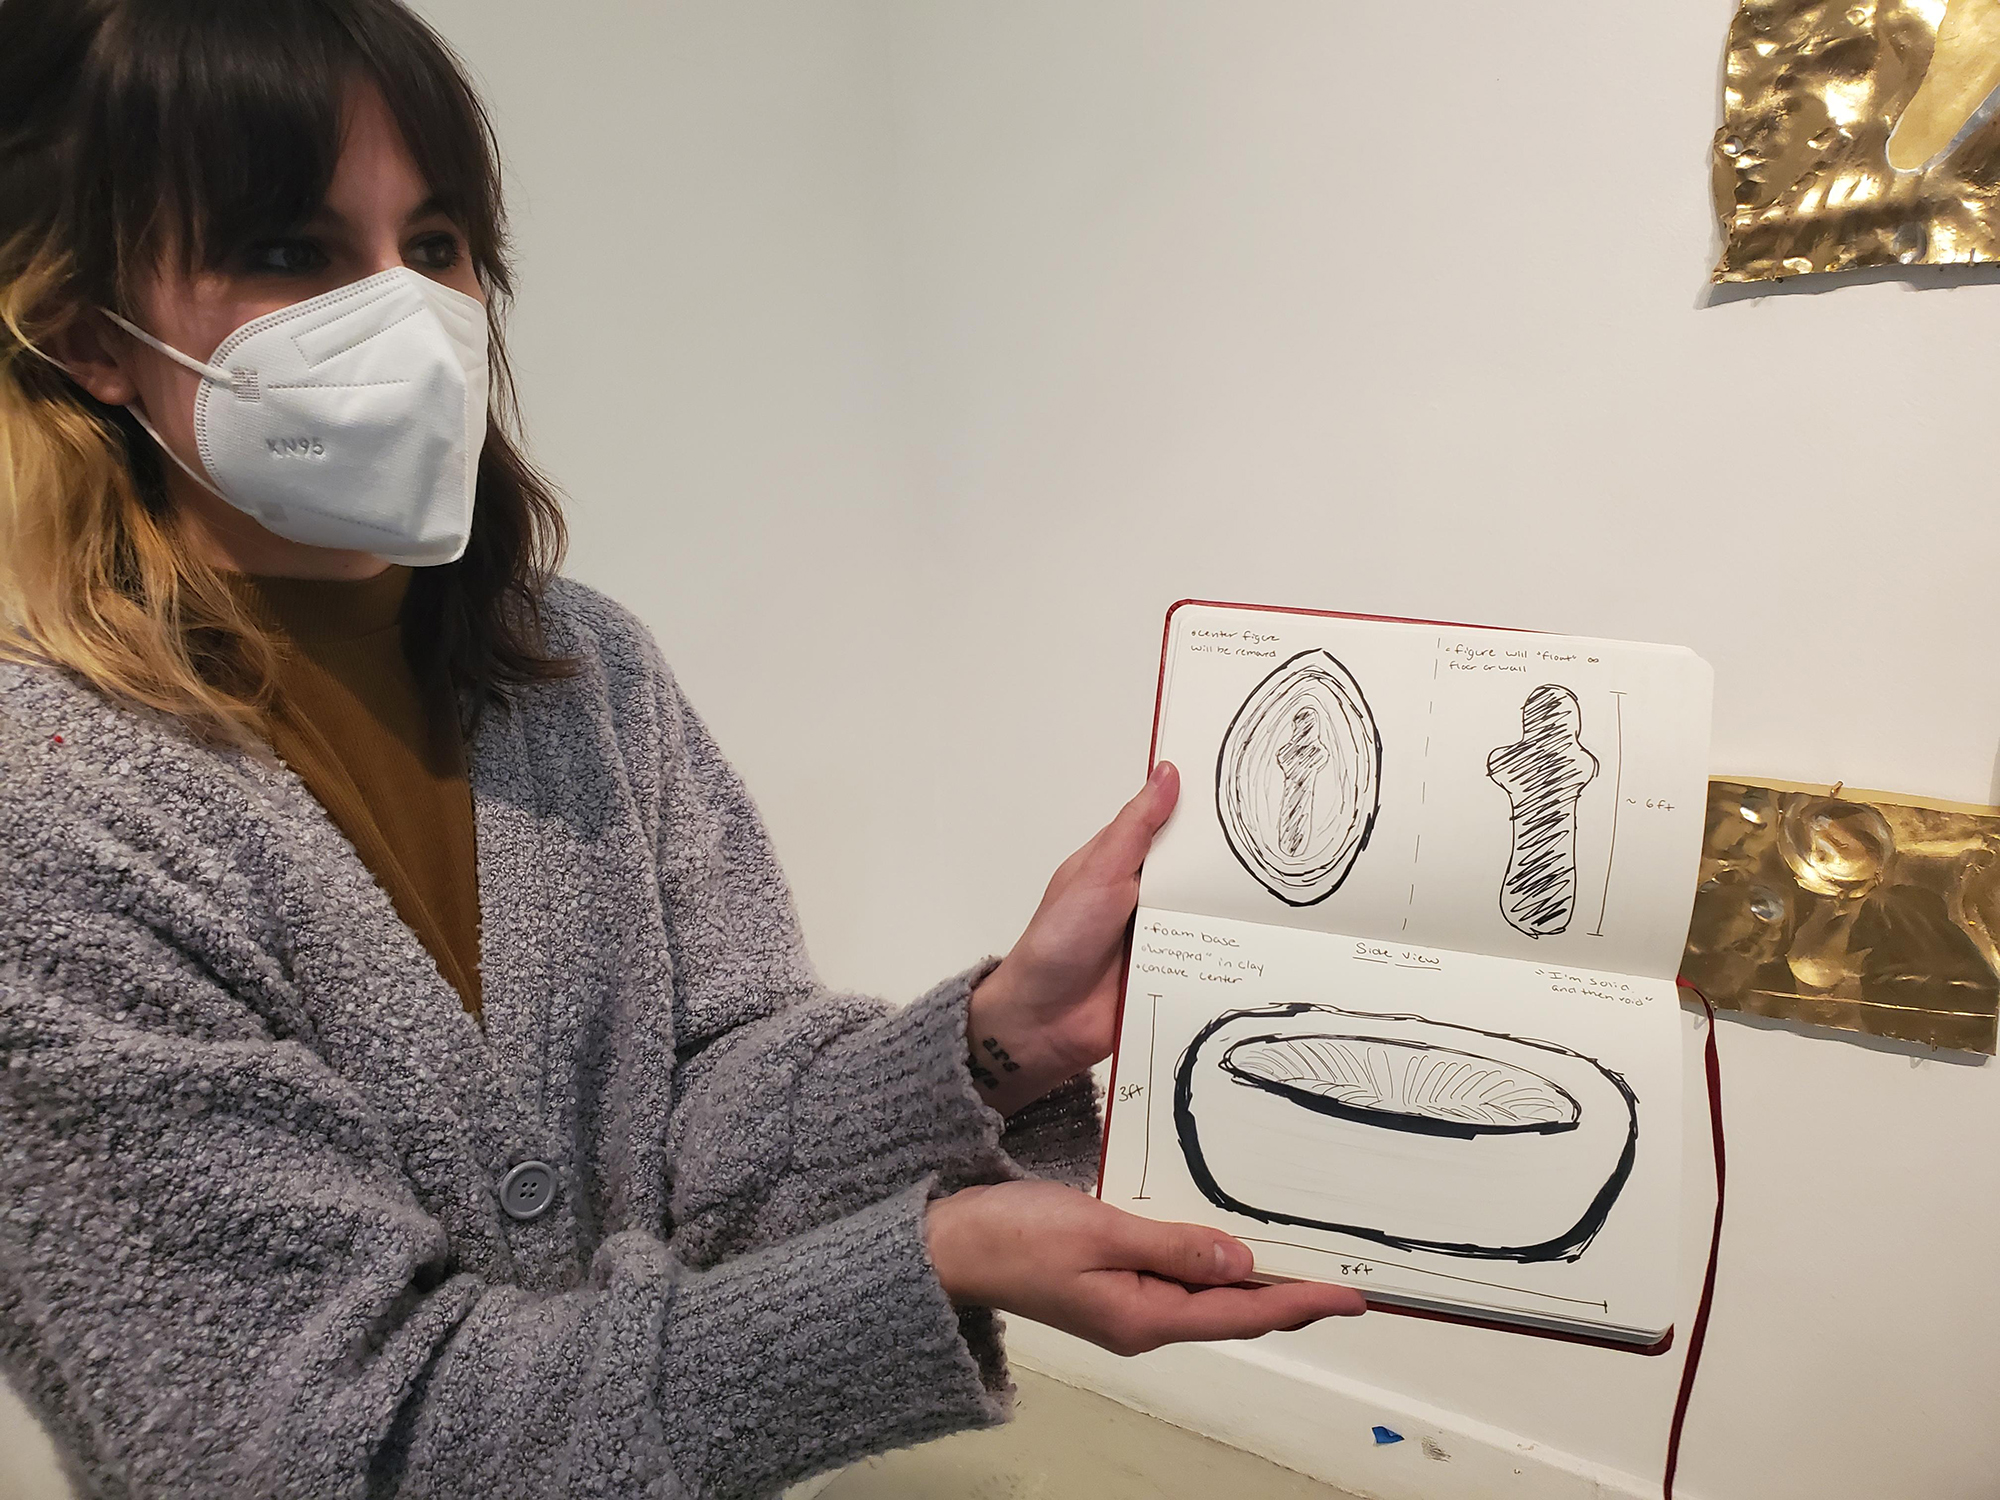 Artist with a N95 mask showing a drawing in their sketchbook.